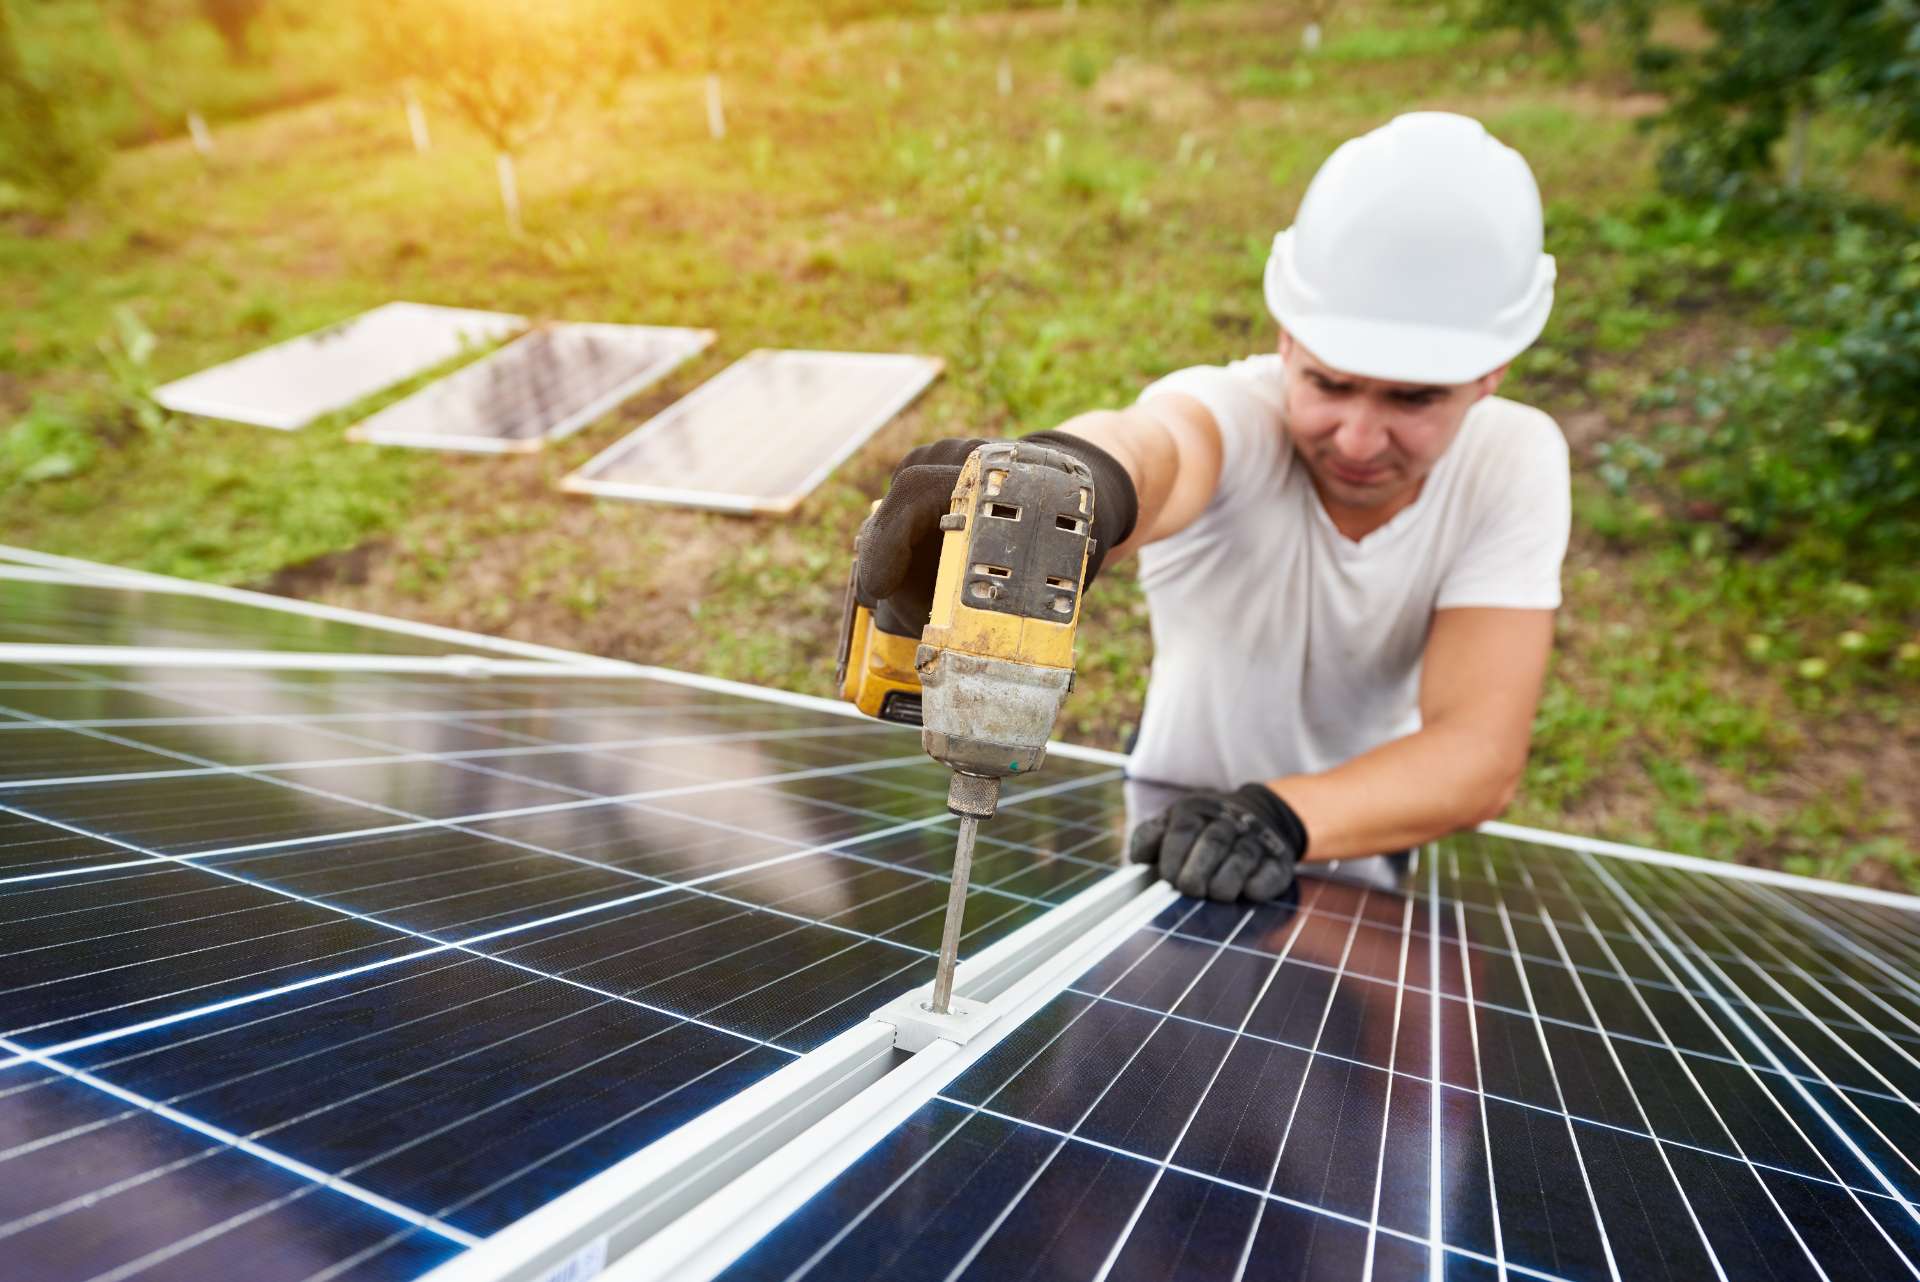 Man mounting solar panel to roof image